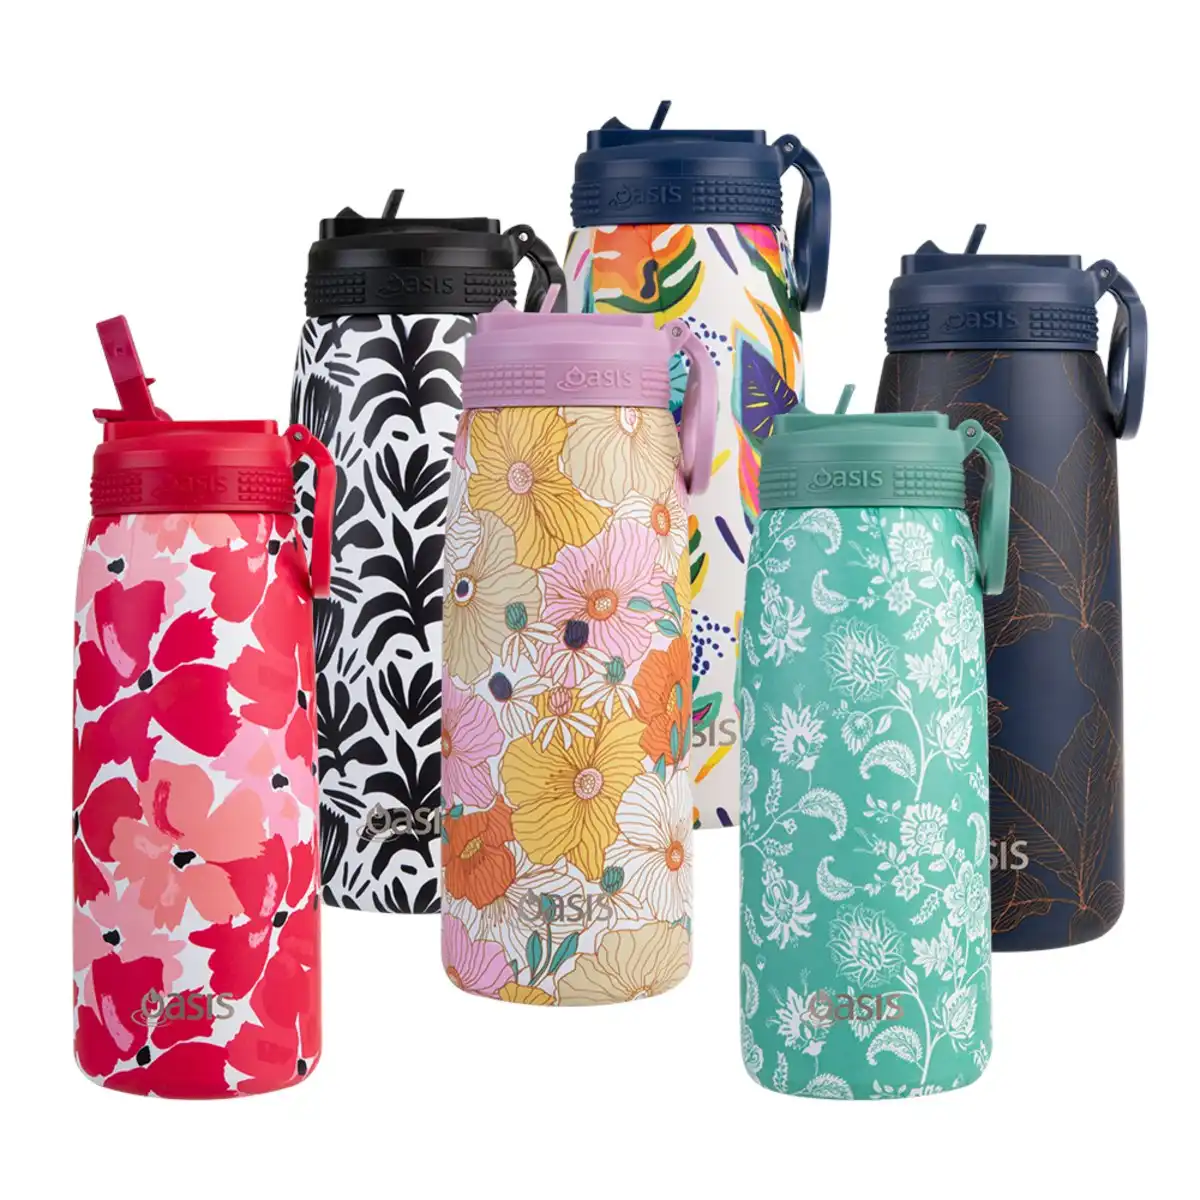 Oasis 780ml Patterned Insulated Sports Bottle With Straw